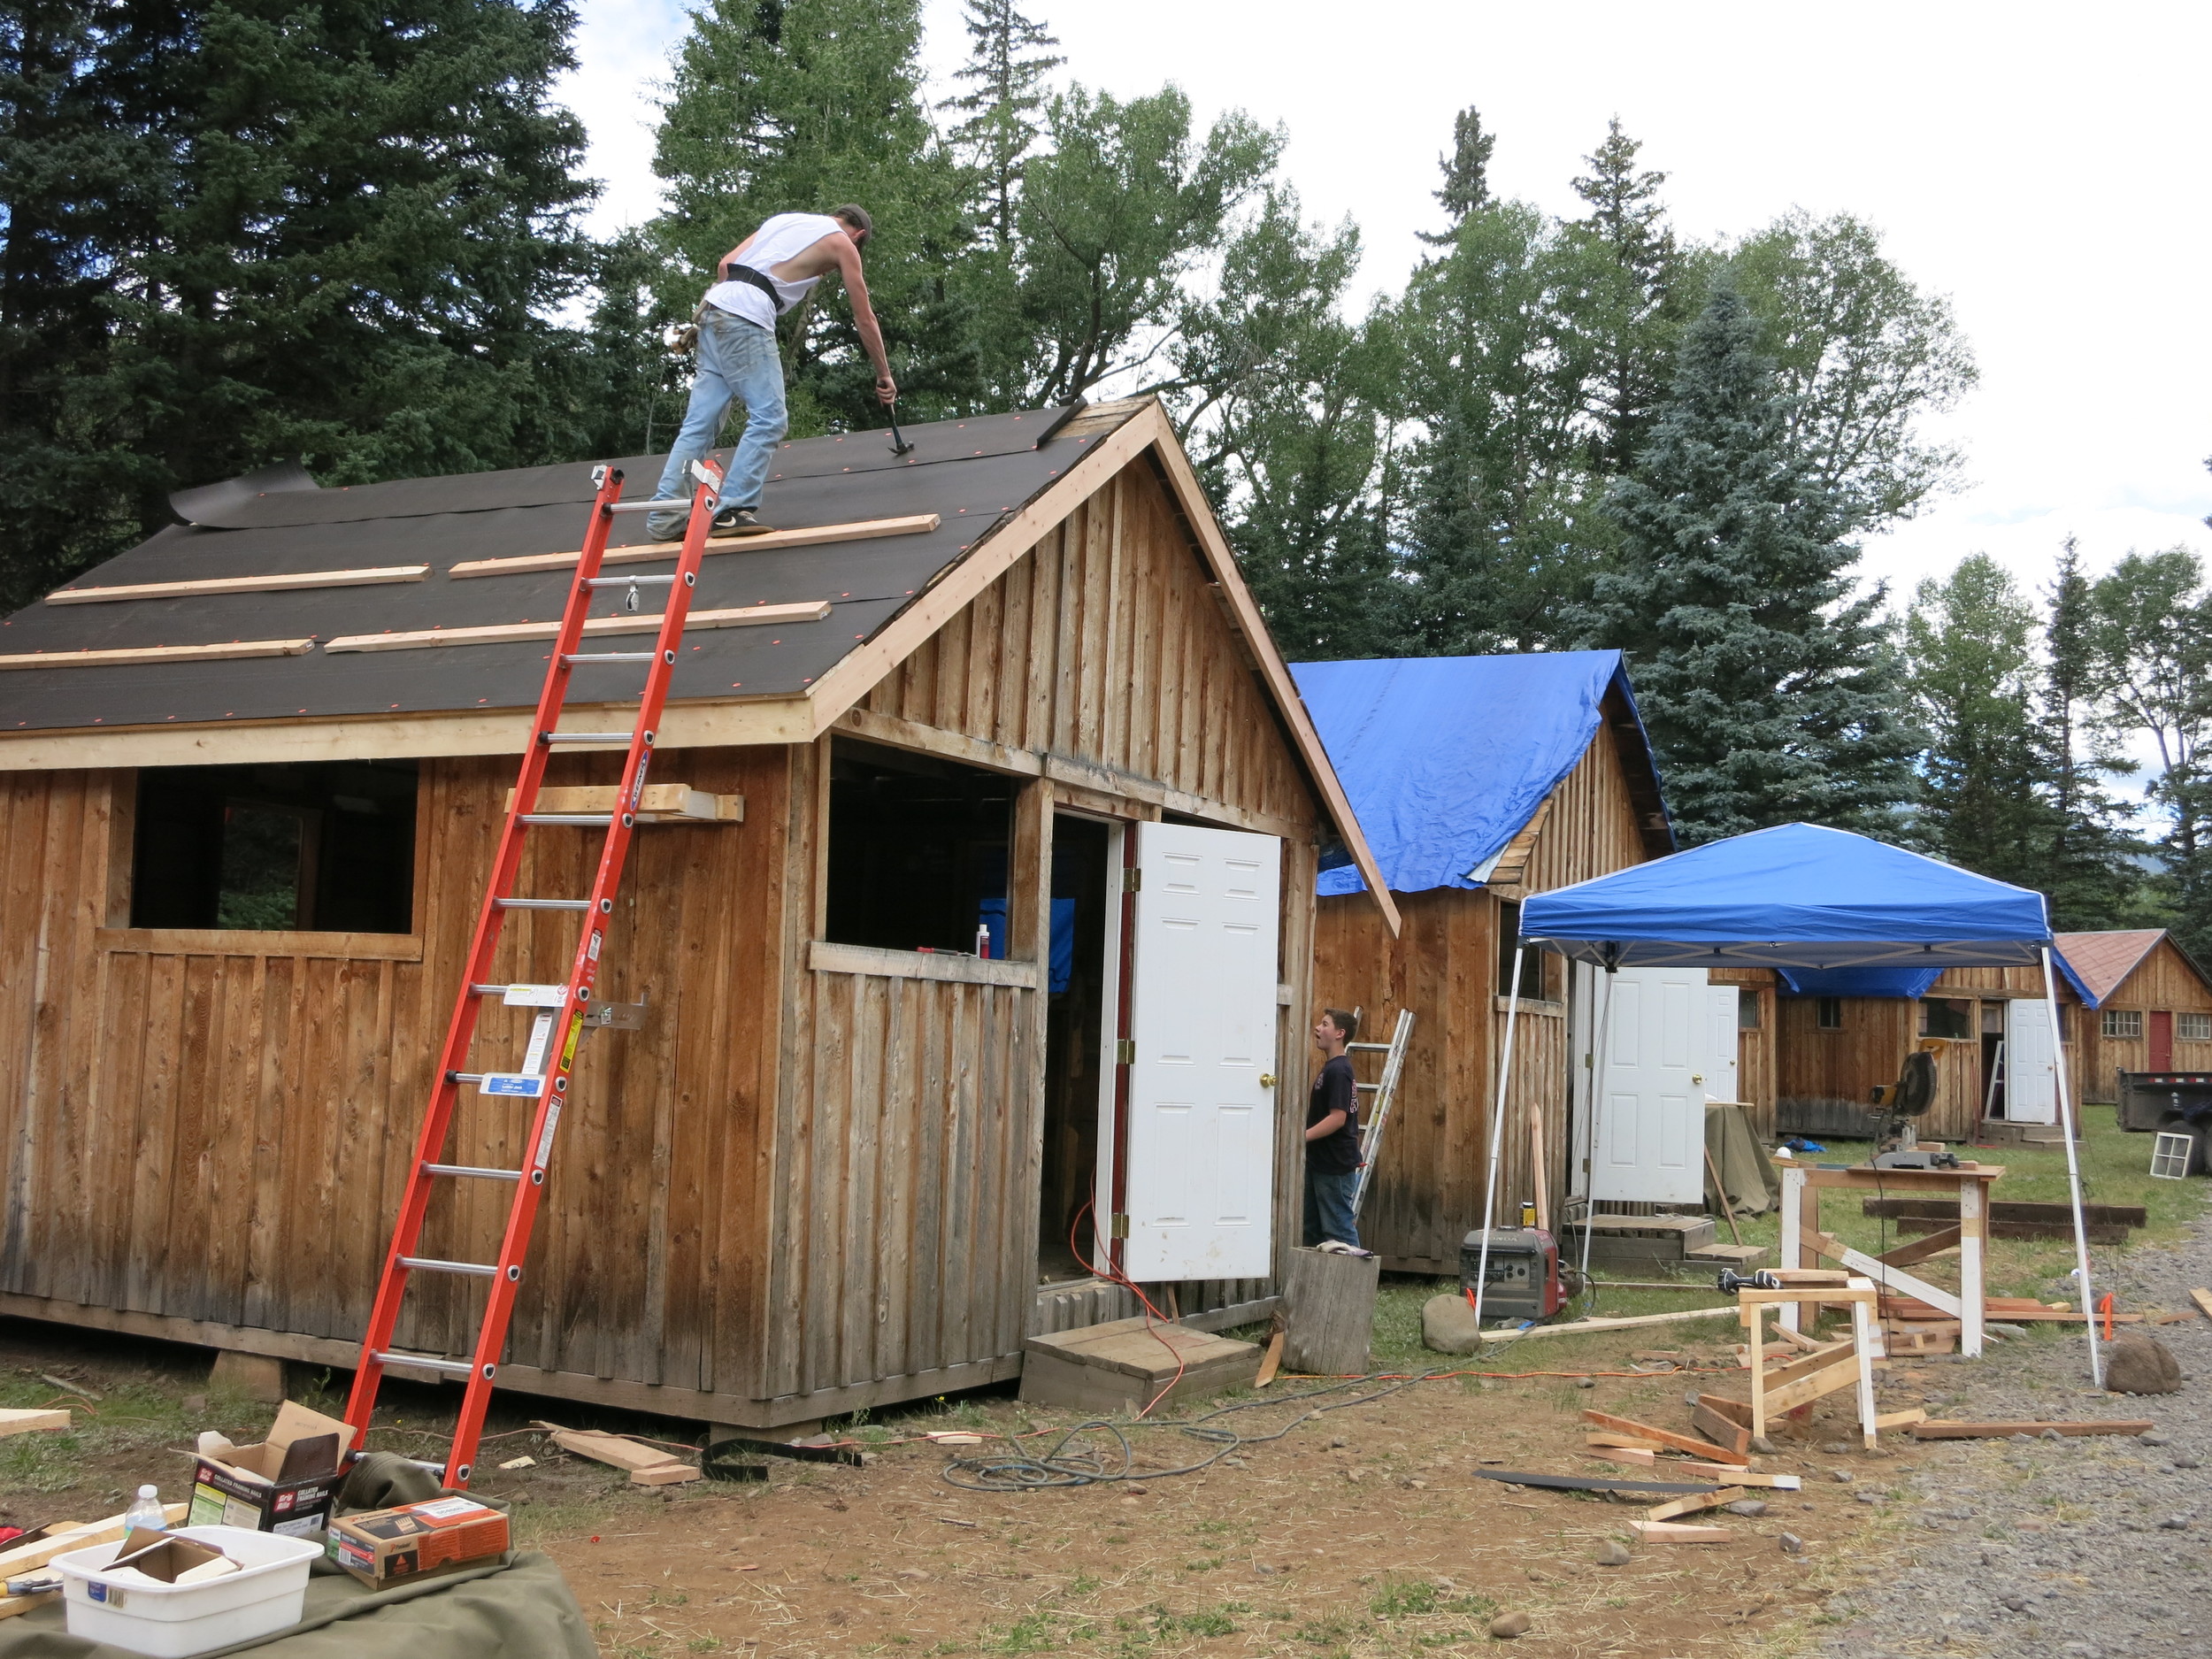 Installing new roof on cabins